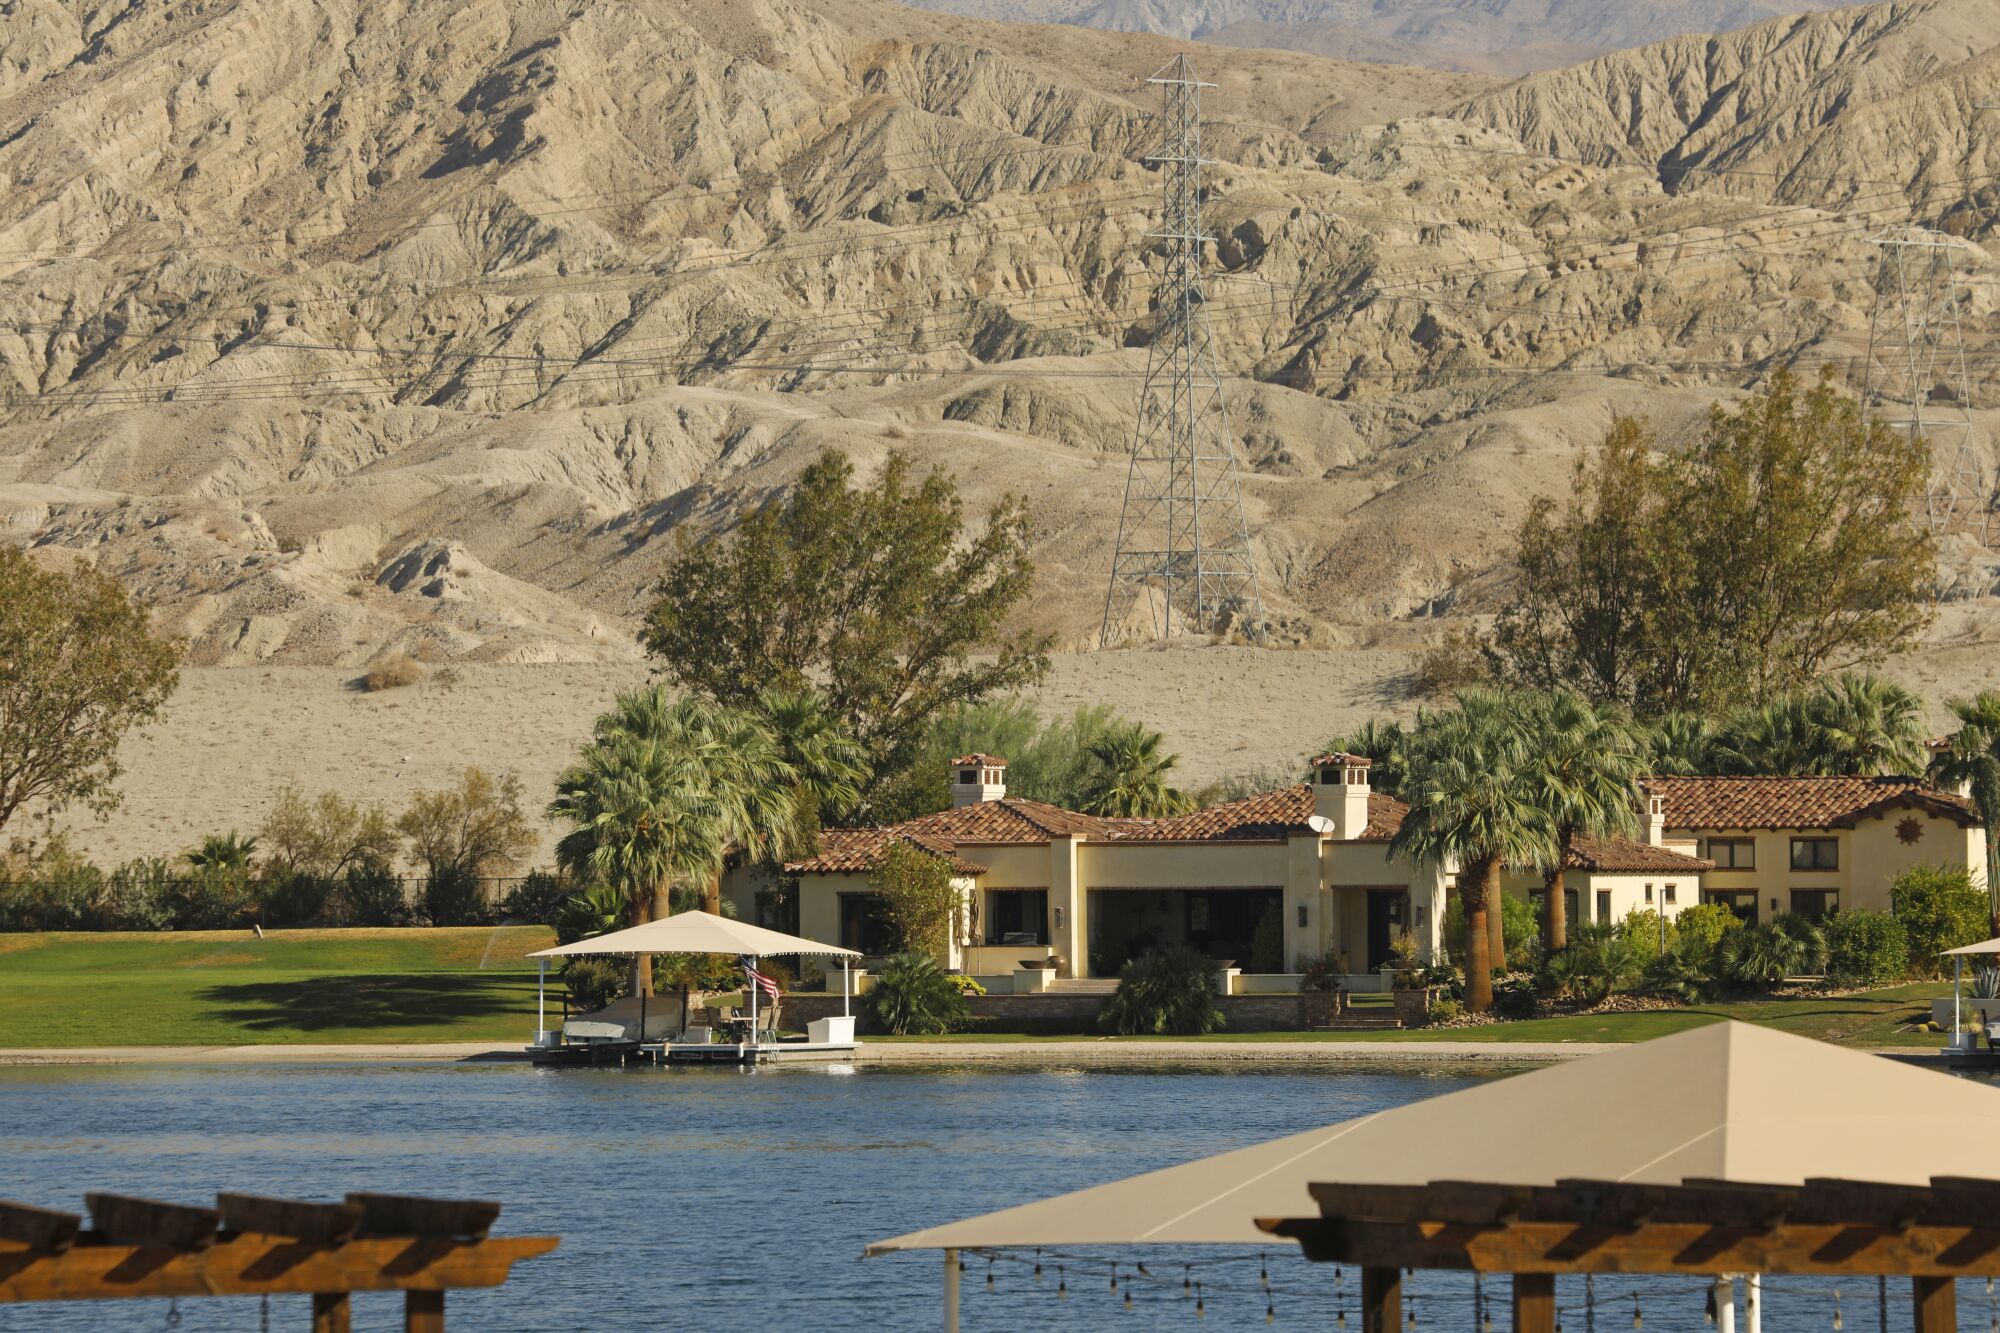 Houses on an artificial lake next to the desert mountains.